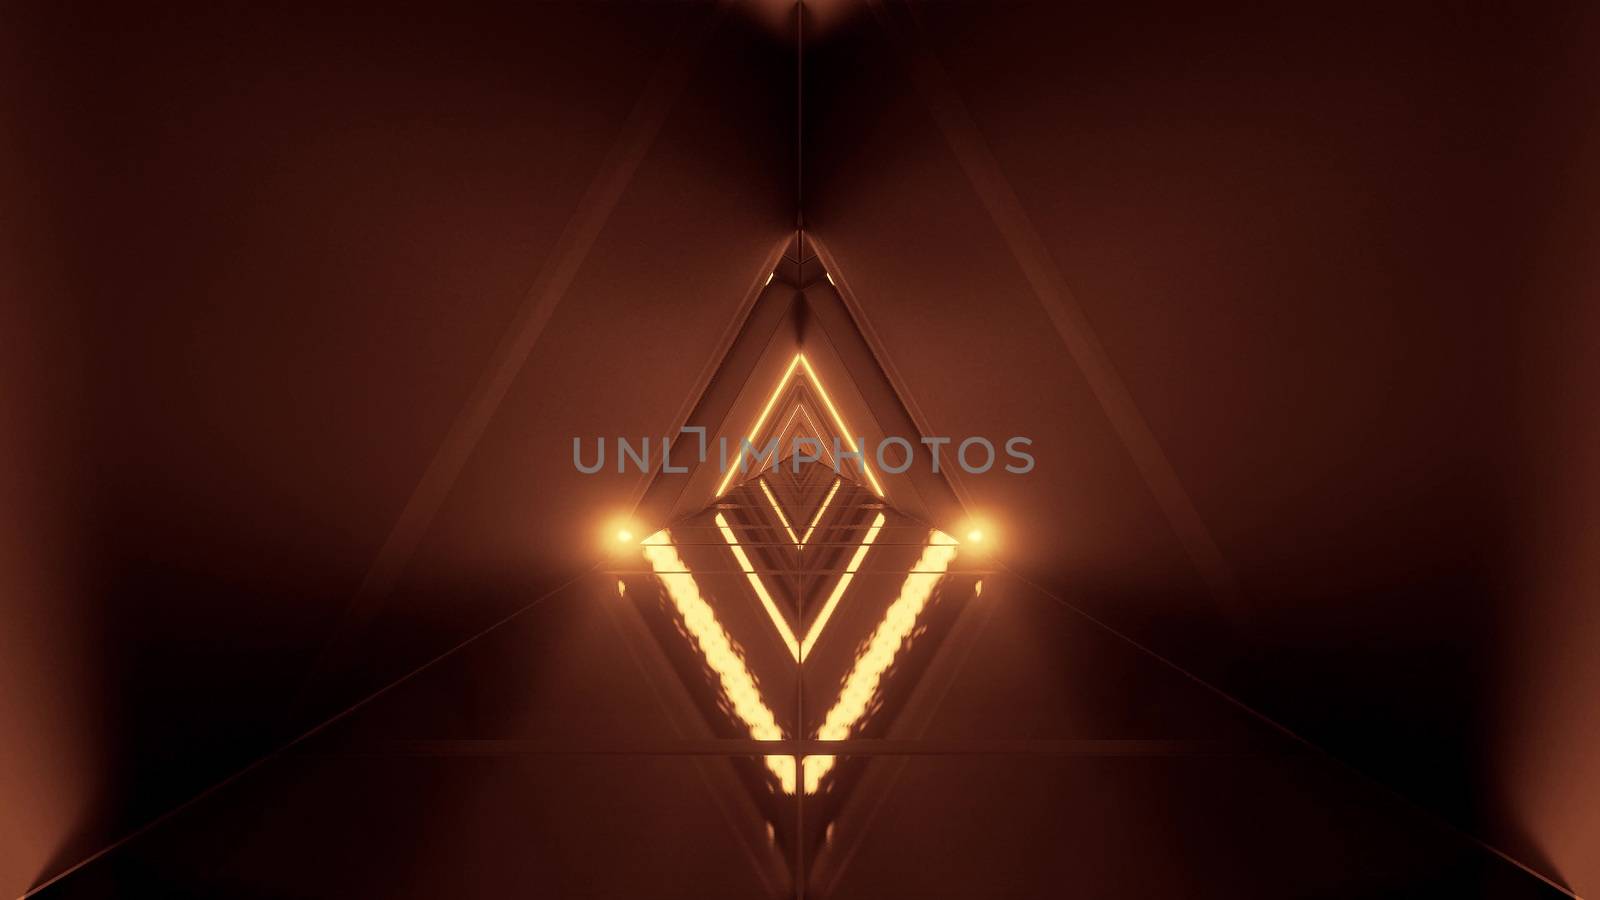 glowing triangle space ship temple tunnel corridor in futuristic sci-fi style with reflective glass bottom 3d illustration background wallpaper by tunnelmotions